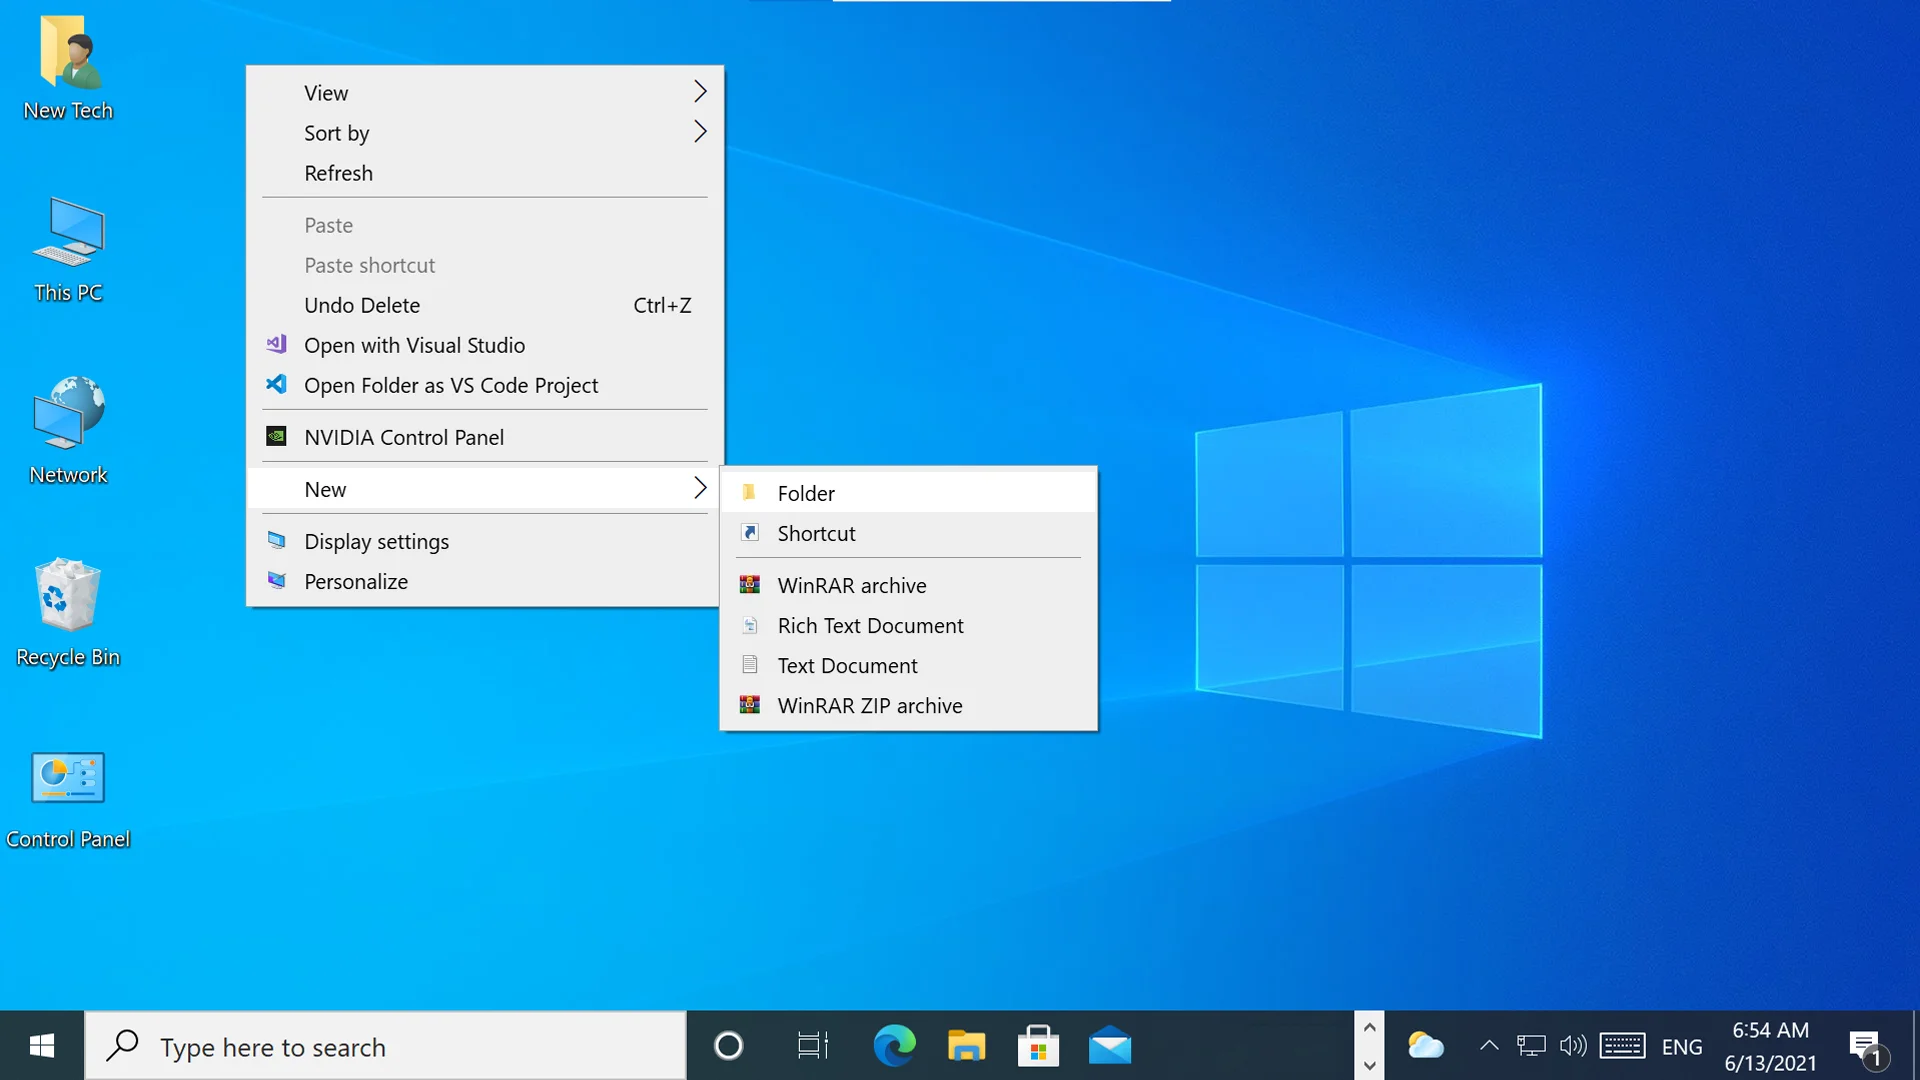 How to create a New Folder in Windows 10